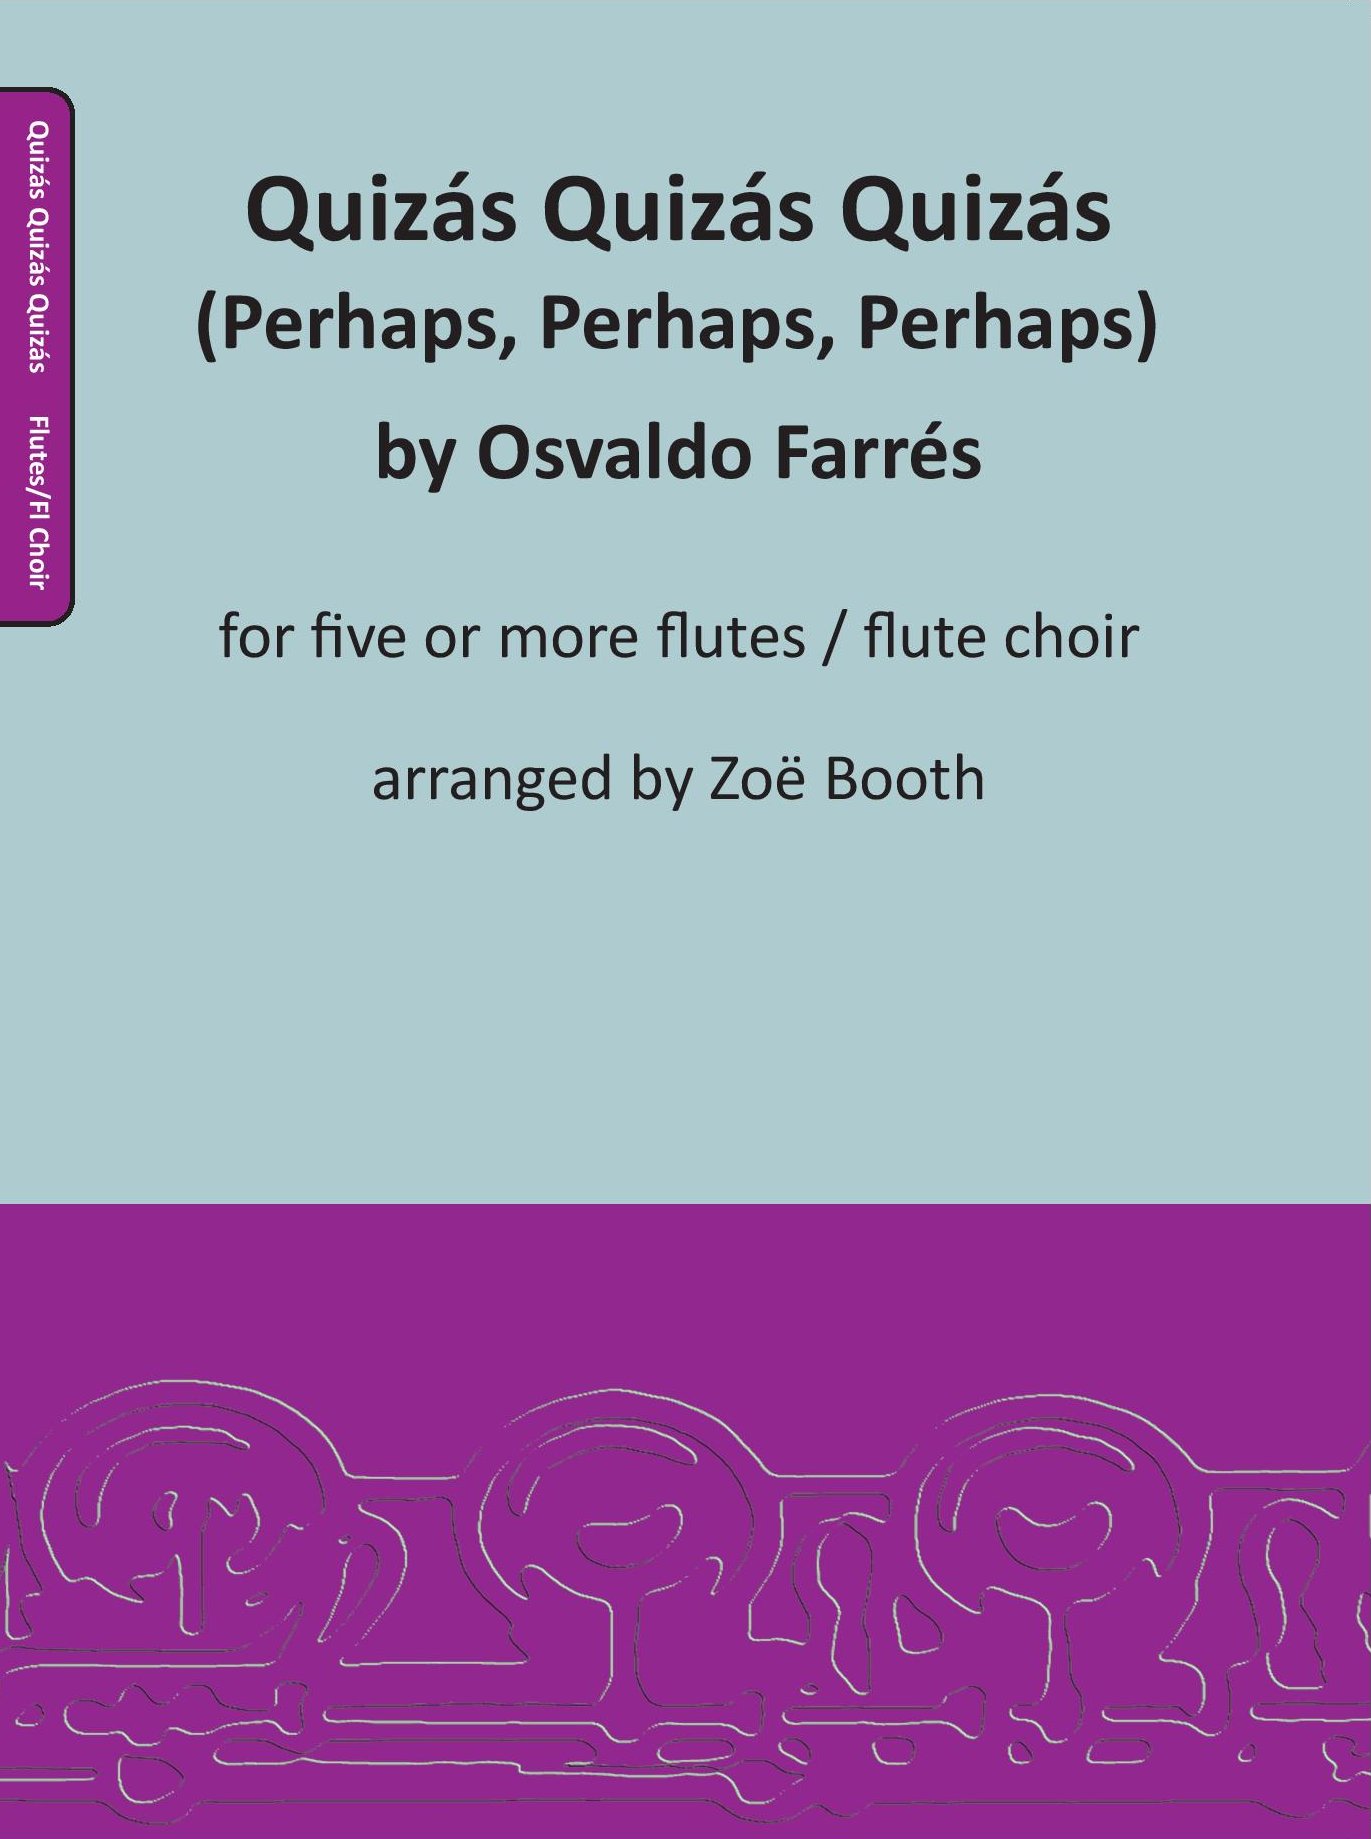 Quizas, Quizas, Quizas by Farres, arranged by Zoë Booth for five or more flutes/flute choir